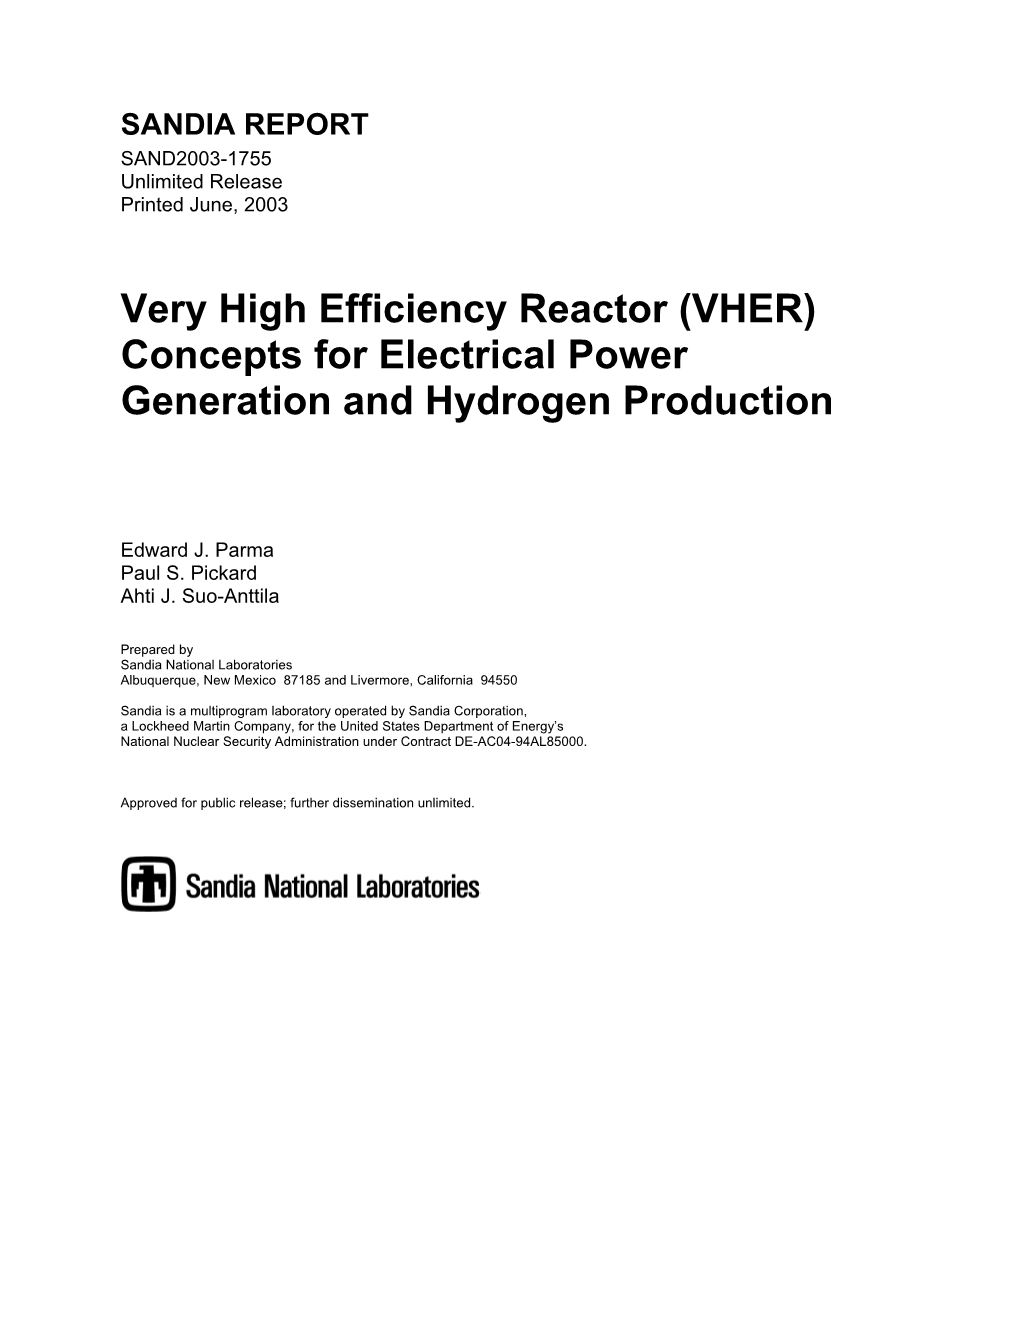 Very High Efficiency Reactor (VHER) Concepts for Electrical Power Generation and Hydrogen Production